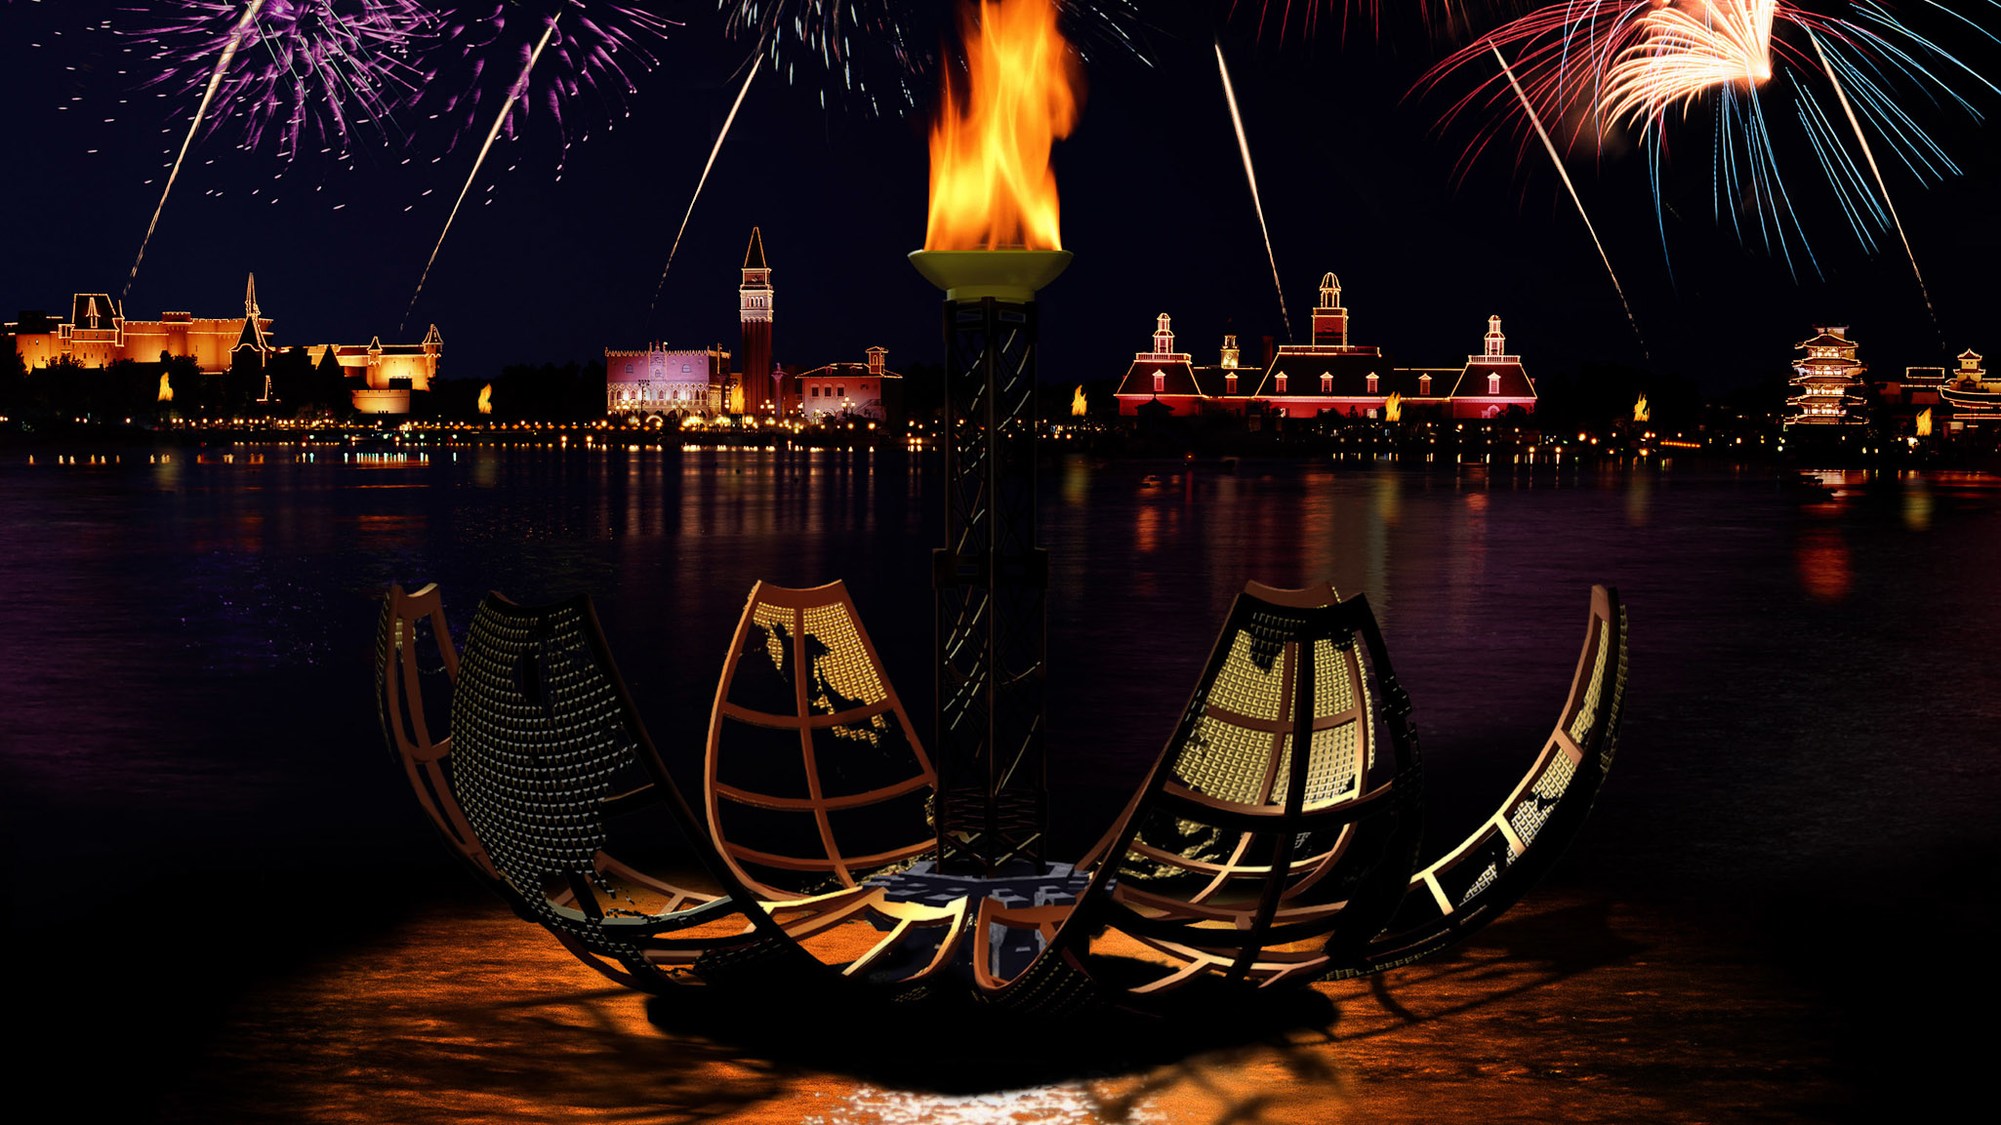 Illuminations Dining Package Coming to Epcot - Blog Mickey
